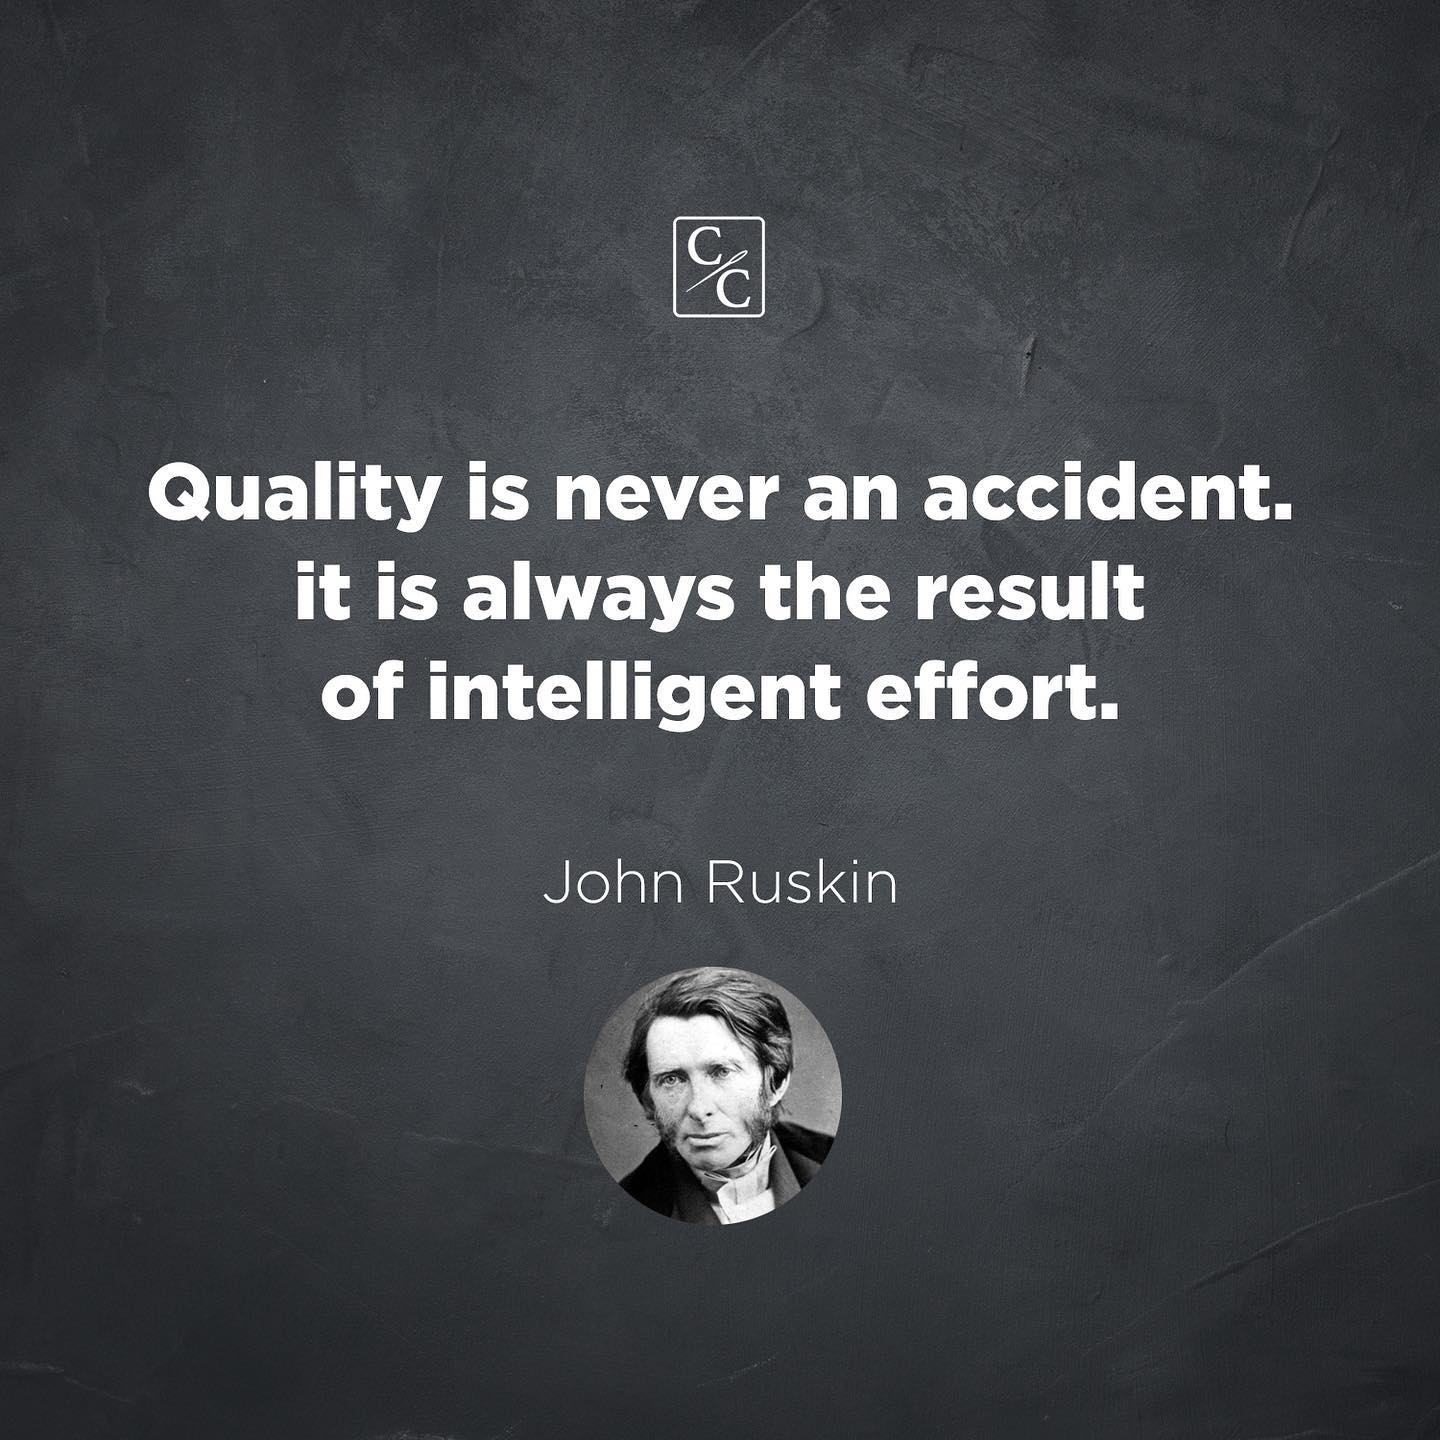 Quality is never an accident it is always the result of intelligent effort